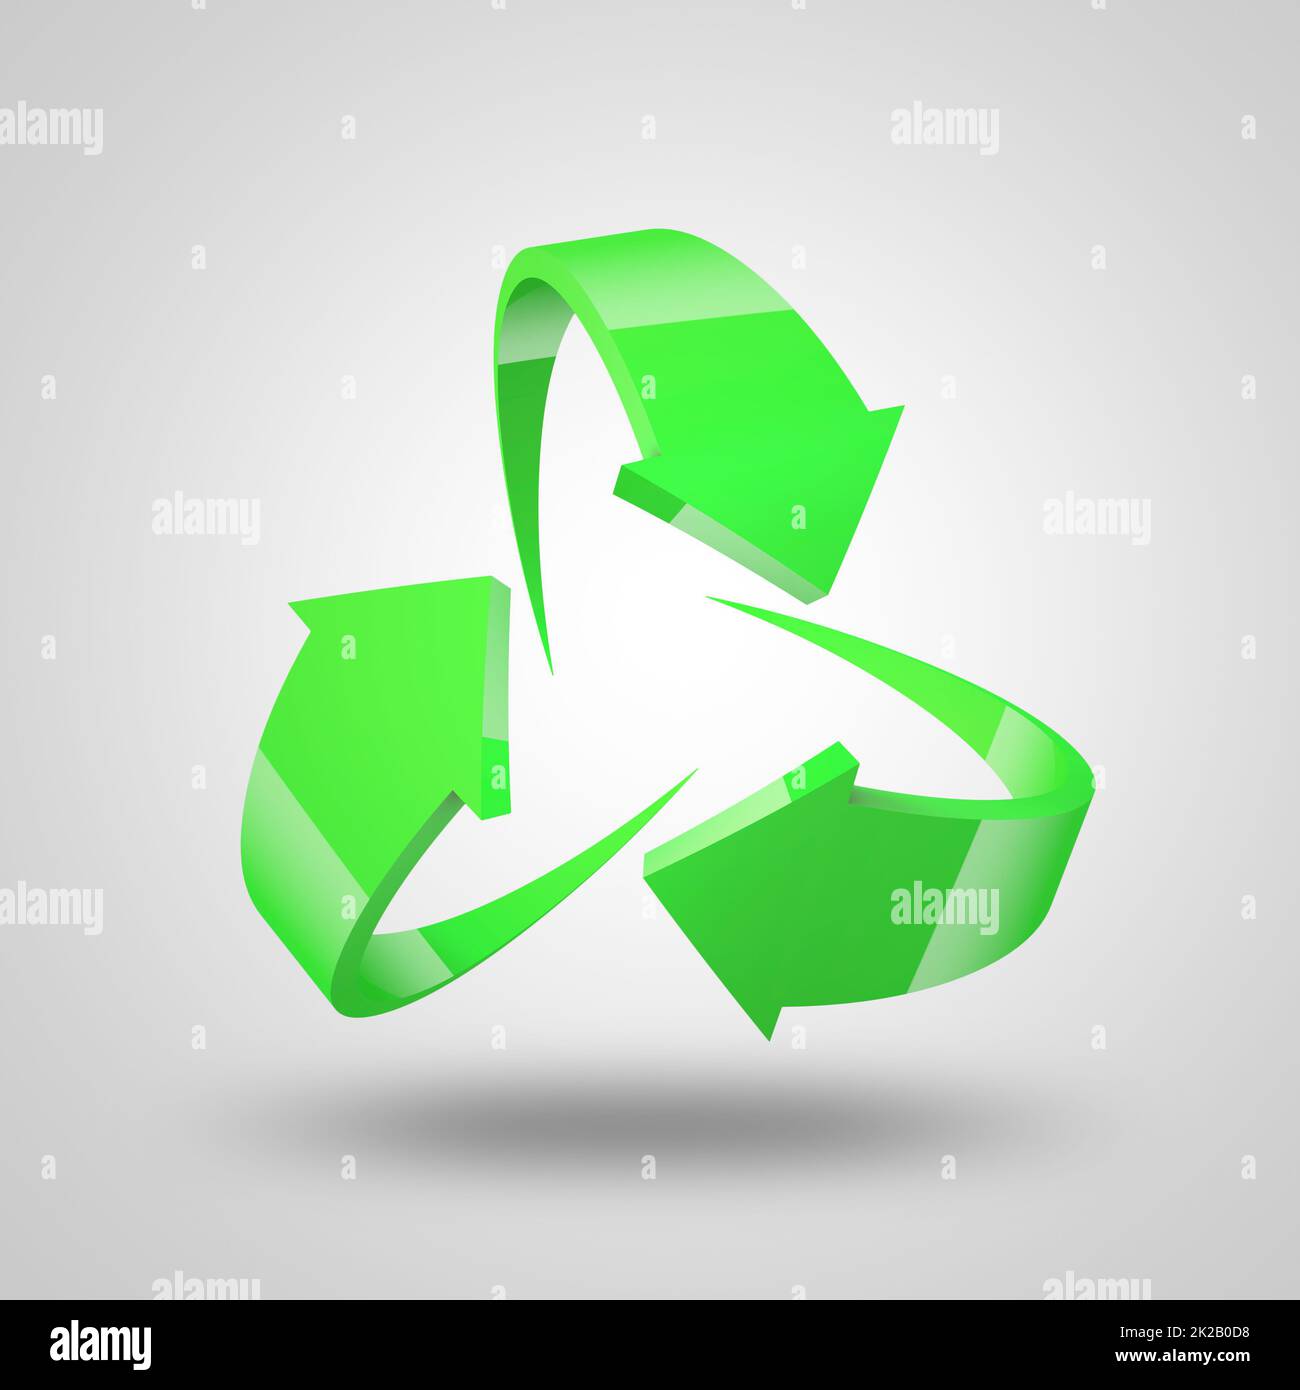 Recycling gets a revamp. Computer graphic of arrows. Stock Photo